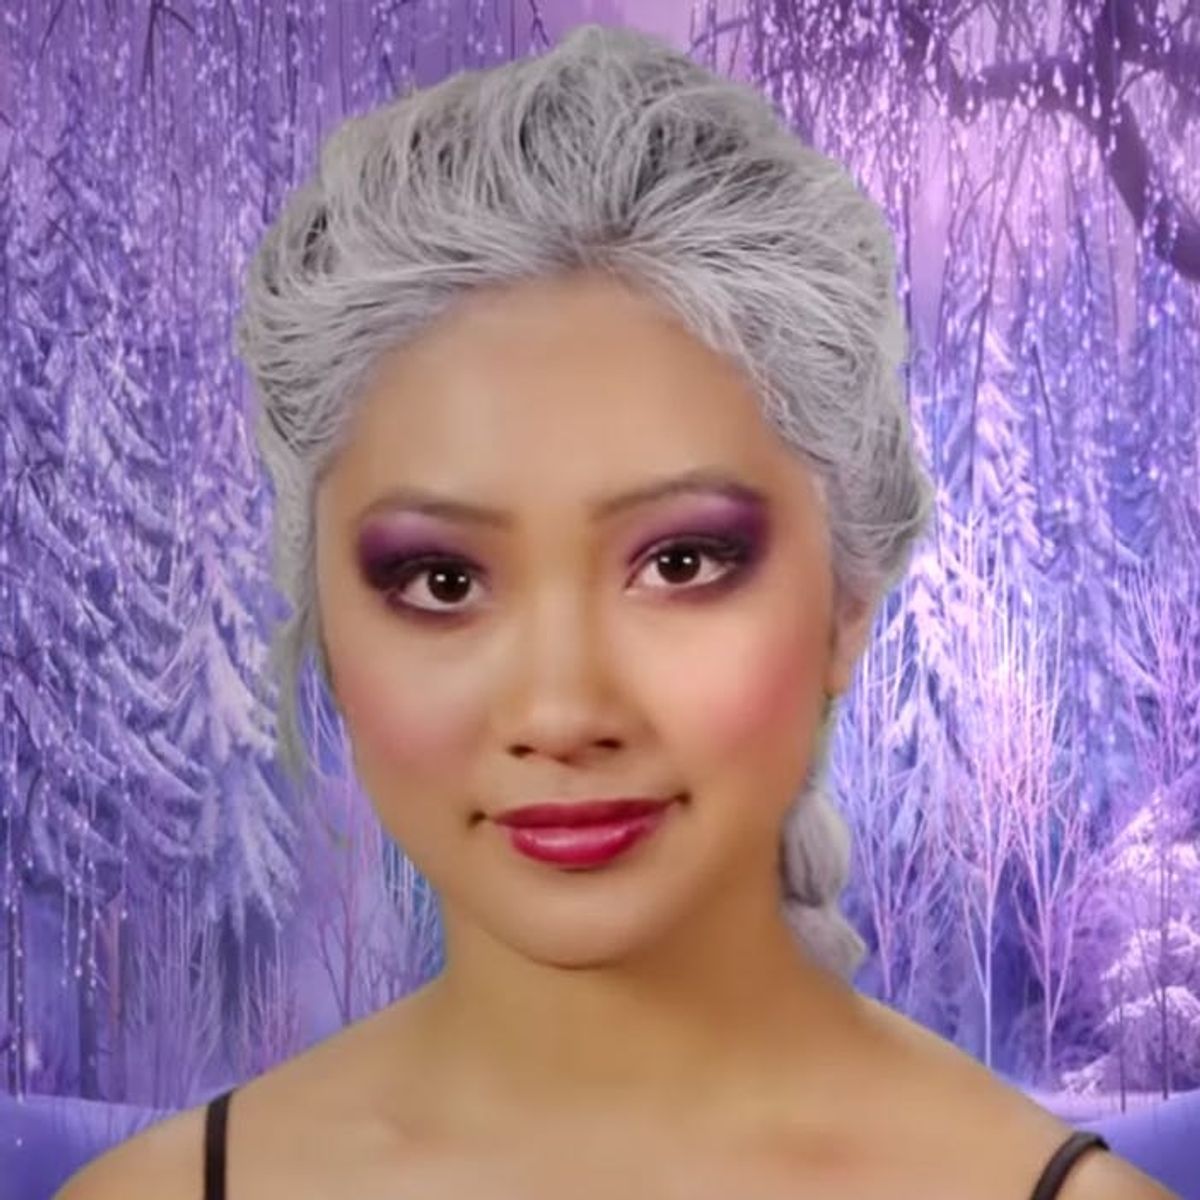 Watch 1 Woman Transform into 7 Disney Princesses in 2 Minutes